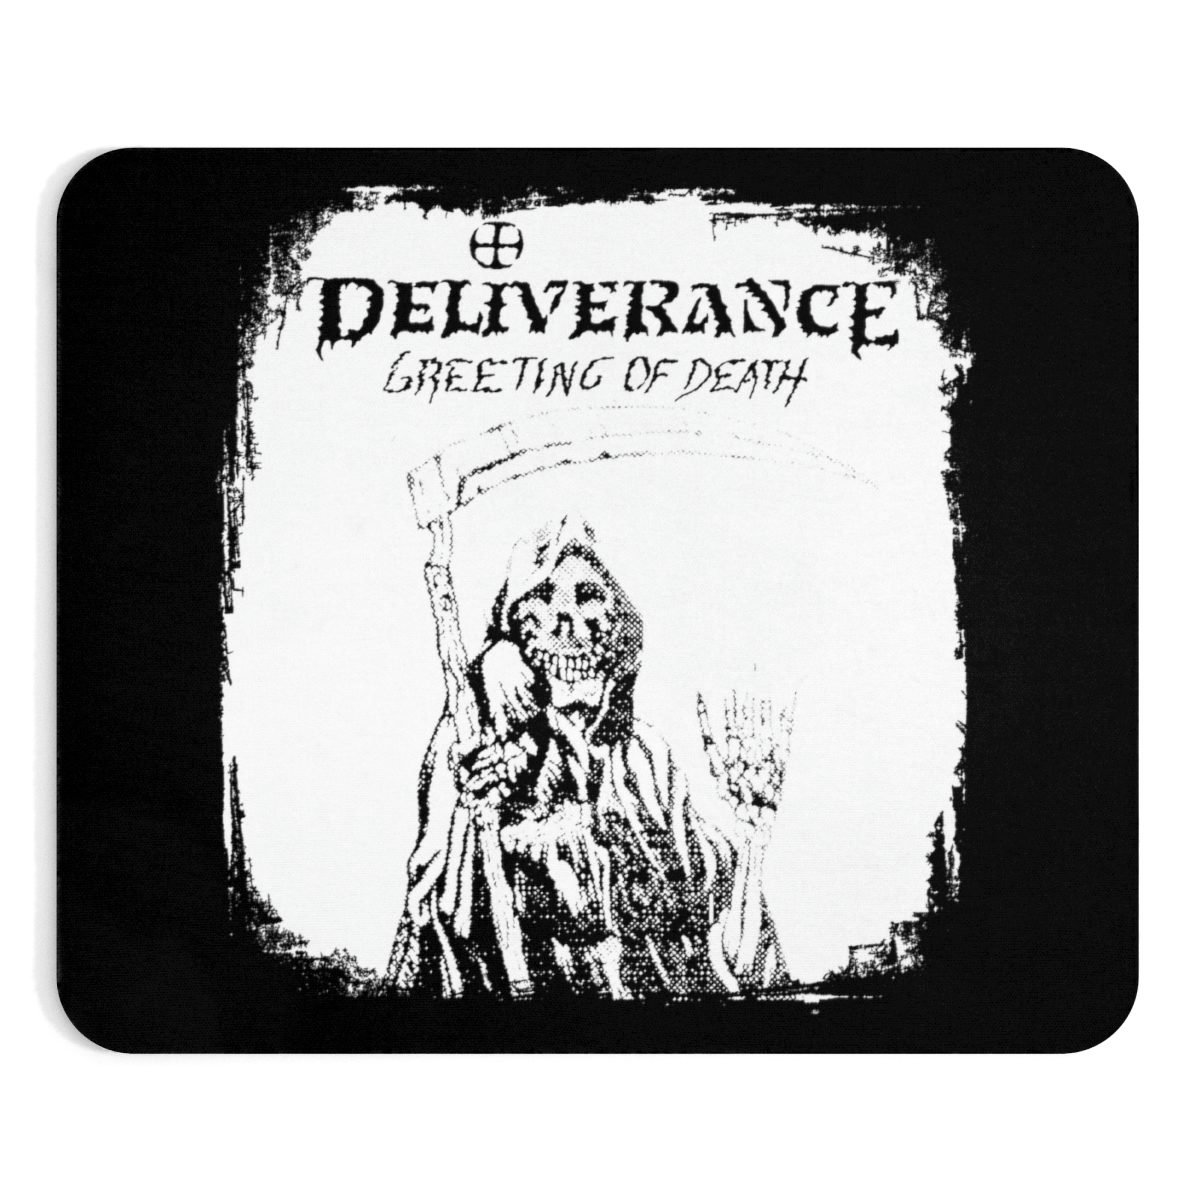 Deliverance – Greeting of Death Mouse Pad